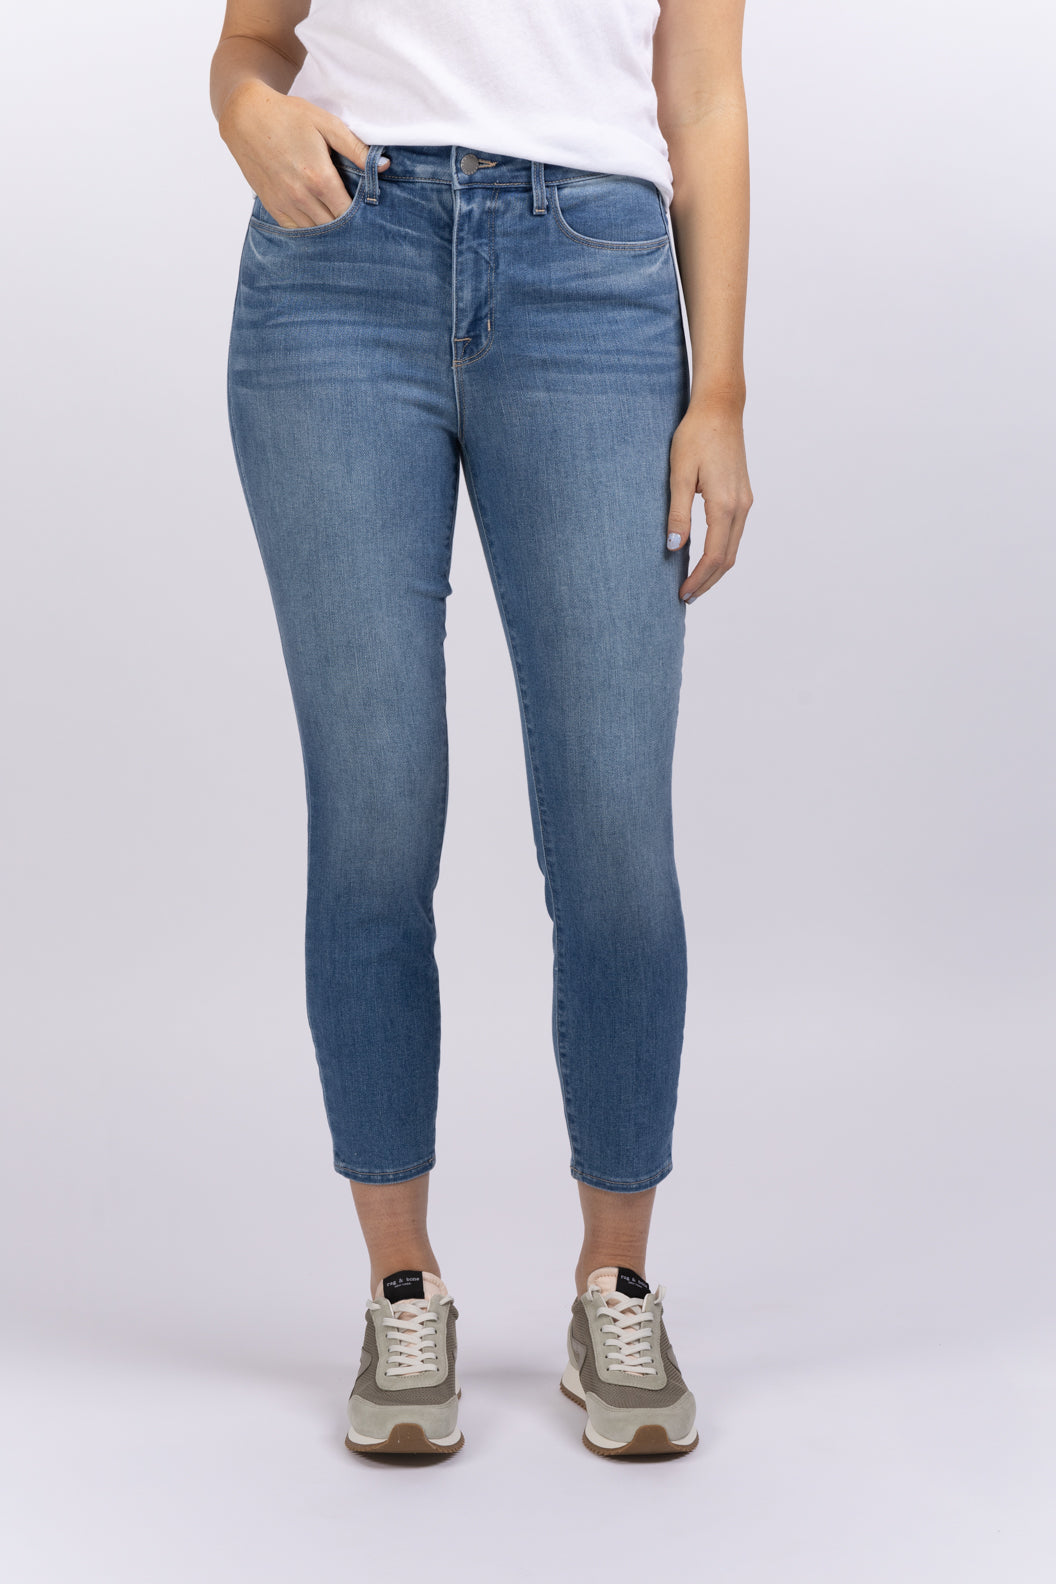 L’Agence Margot Skinny High-Rise Mettalic Silver Jeans Size 24 Retail 595.00